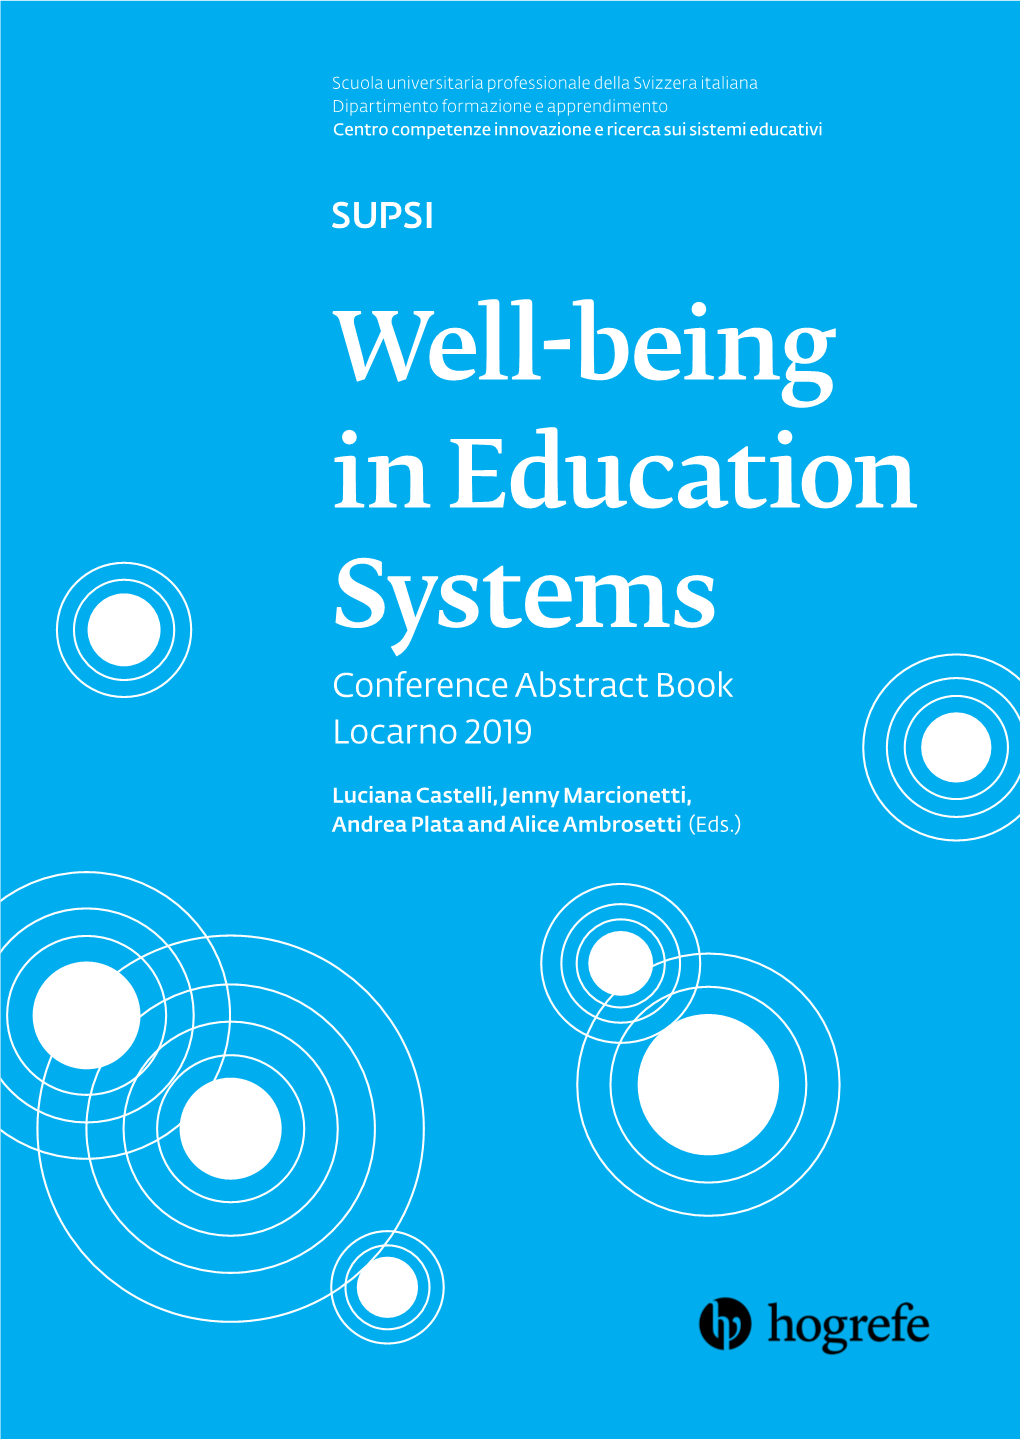 Well-Being in Education Systems Conference Abstract Book, Locarno 2019